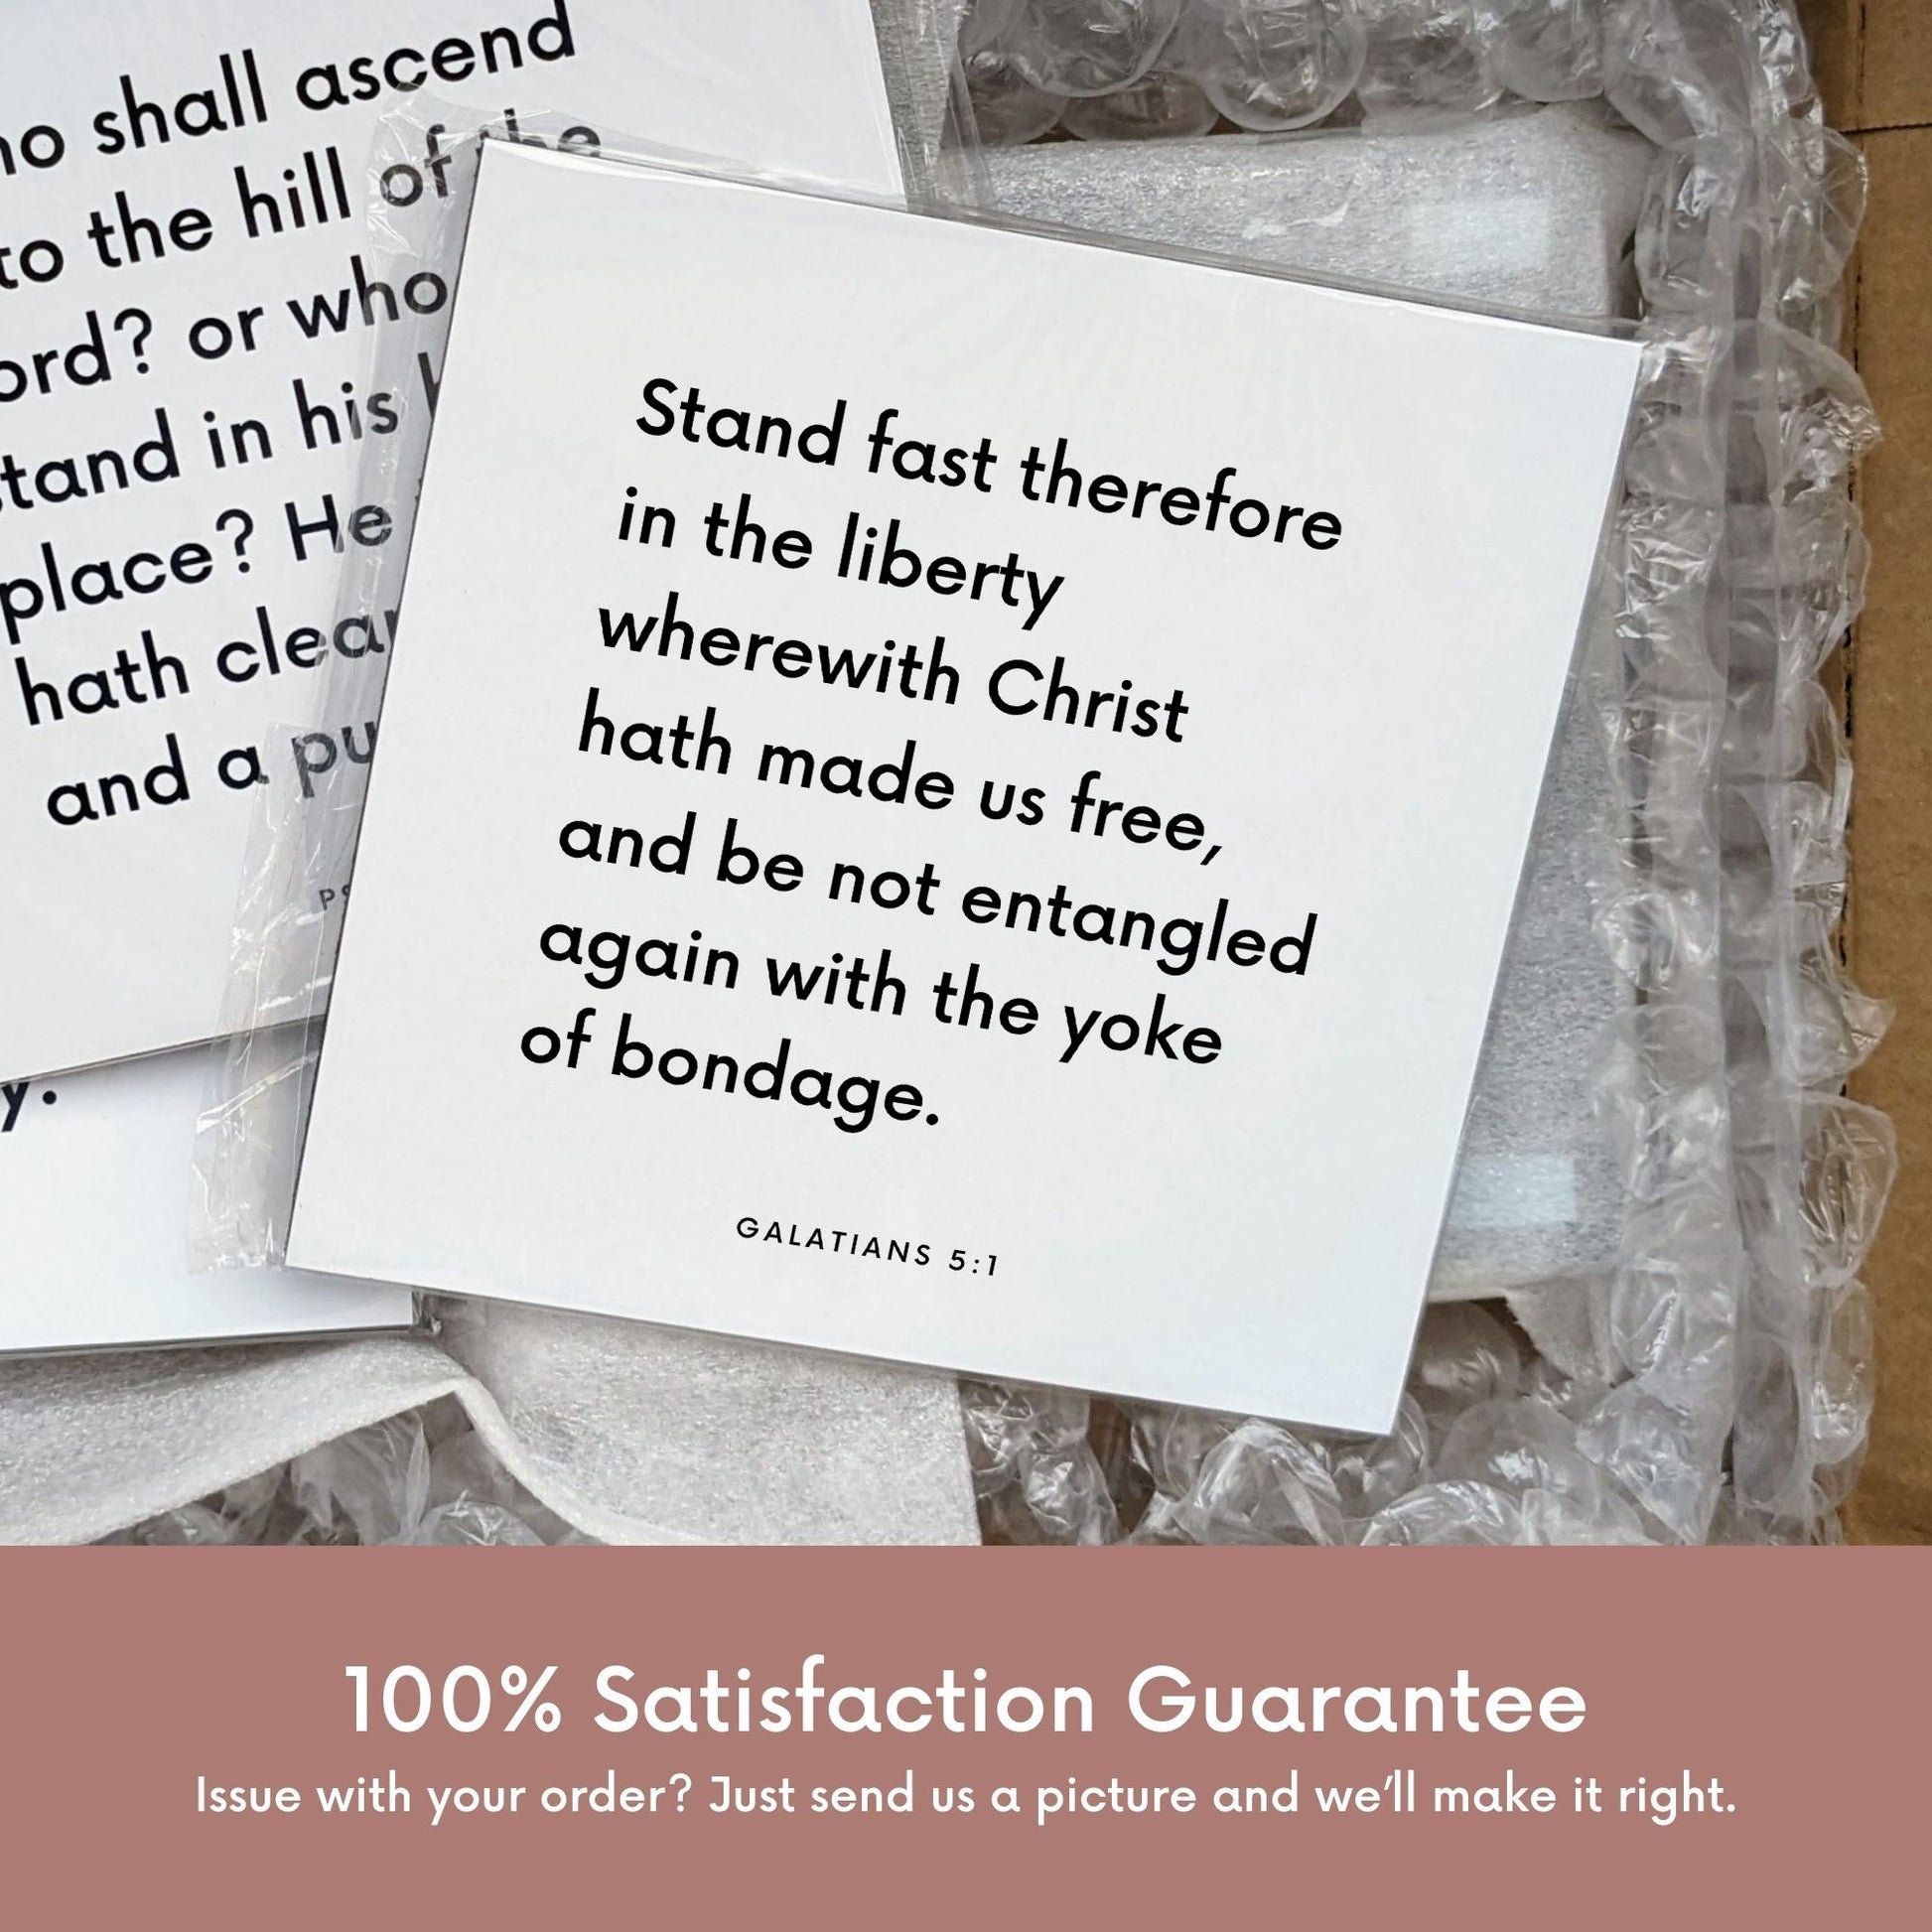 Shipping materials for scripture tile of Galatians 5:1 - "Stand fast in the liberty wherewith Christ hath made us free"